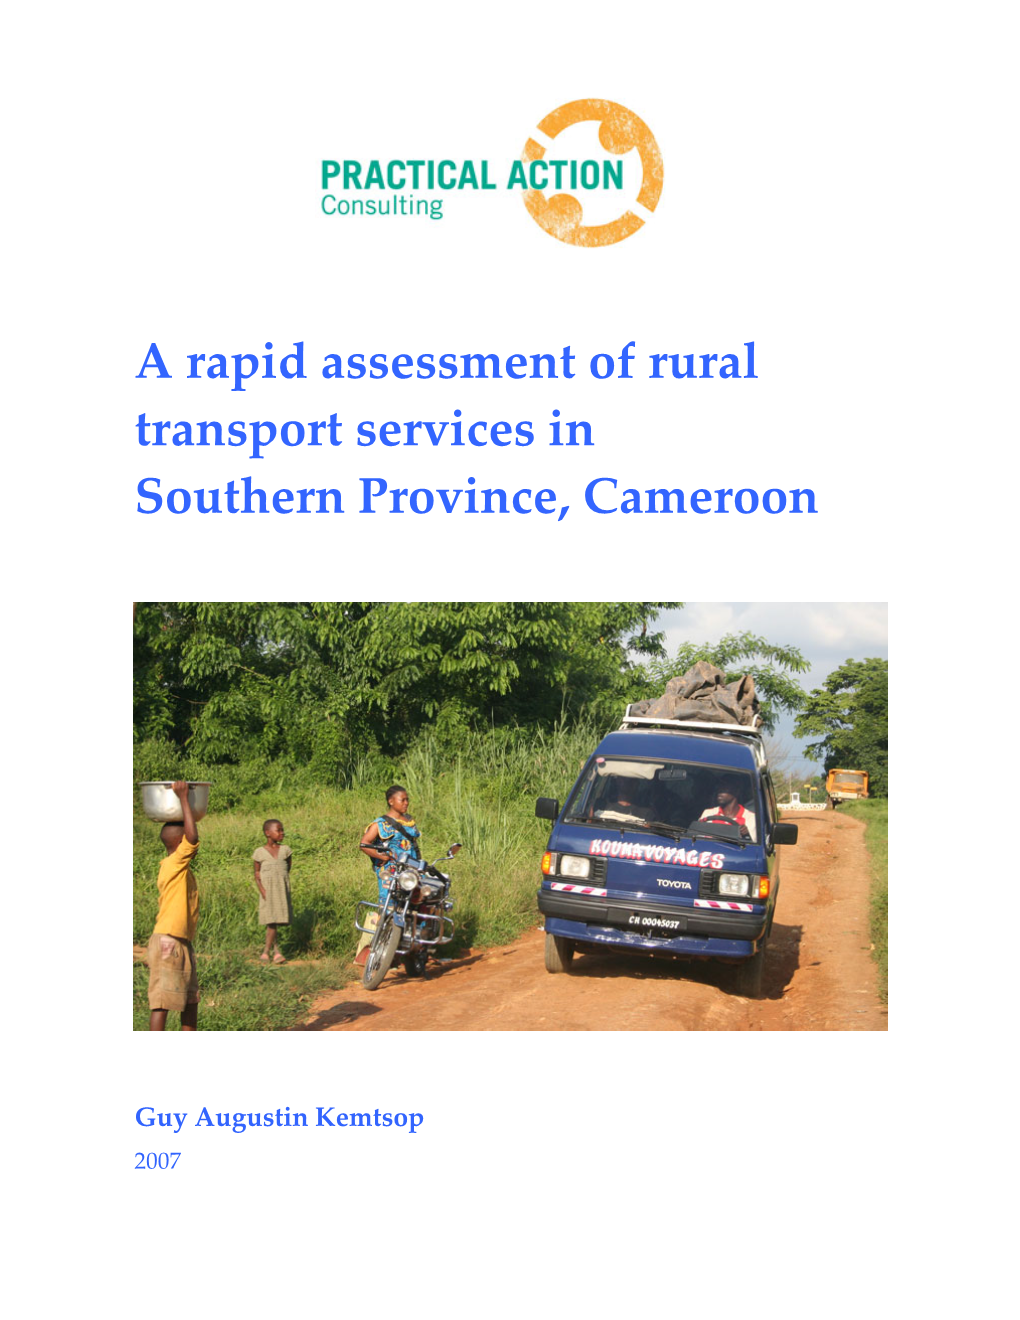 Rural Transport Services, Southern Cameroon